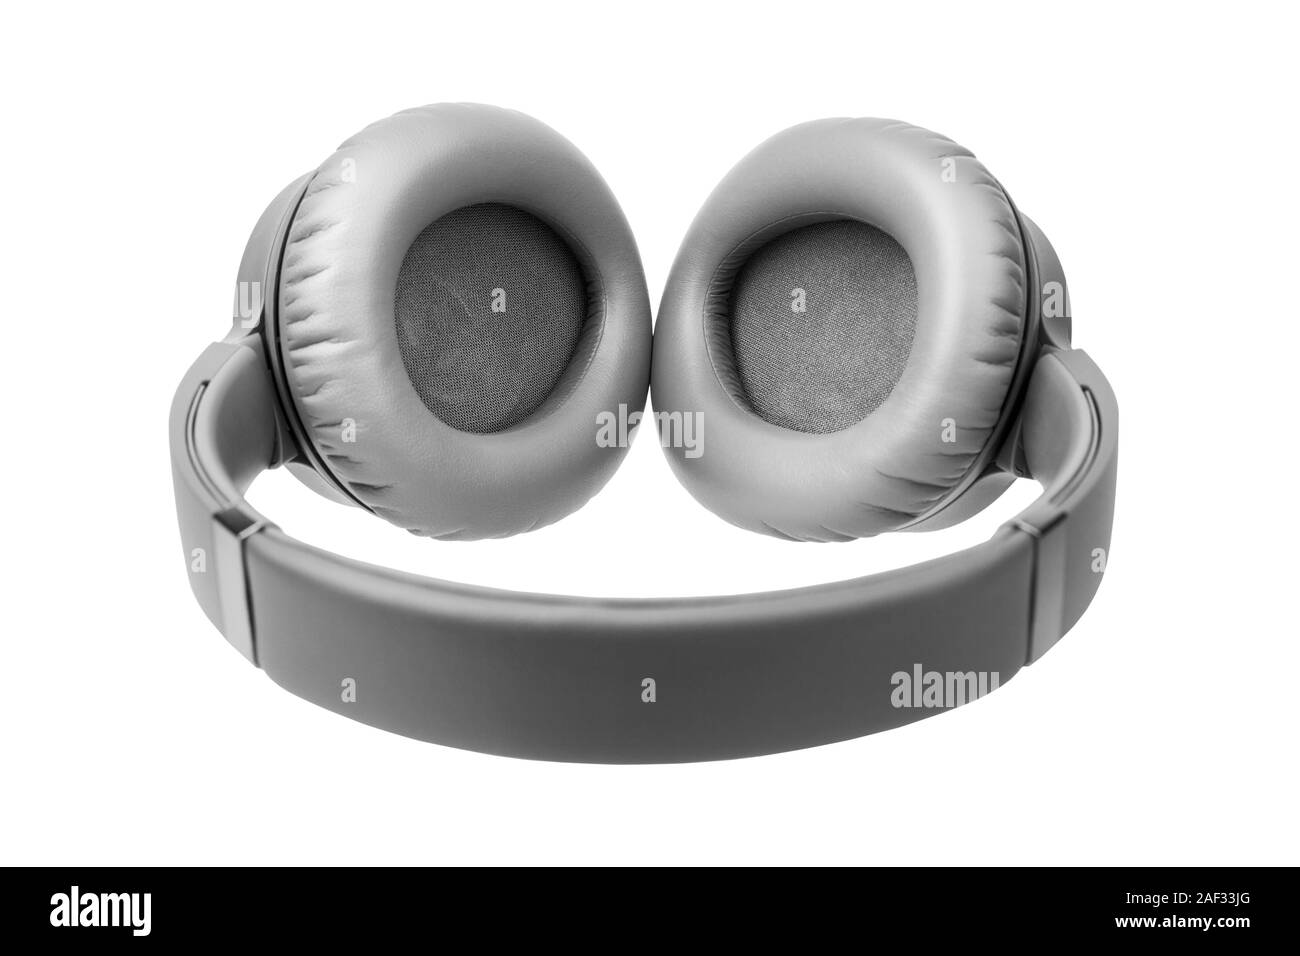 Gray wireless headphones on white background isolated close up, big grey bluetooth headset design, modern black wi-fi stereo sound earphones side view Stock Photo